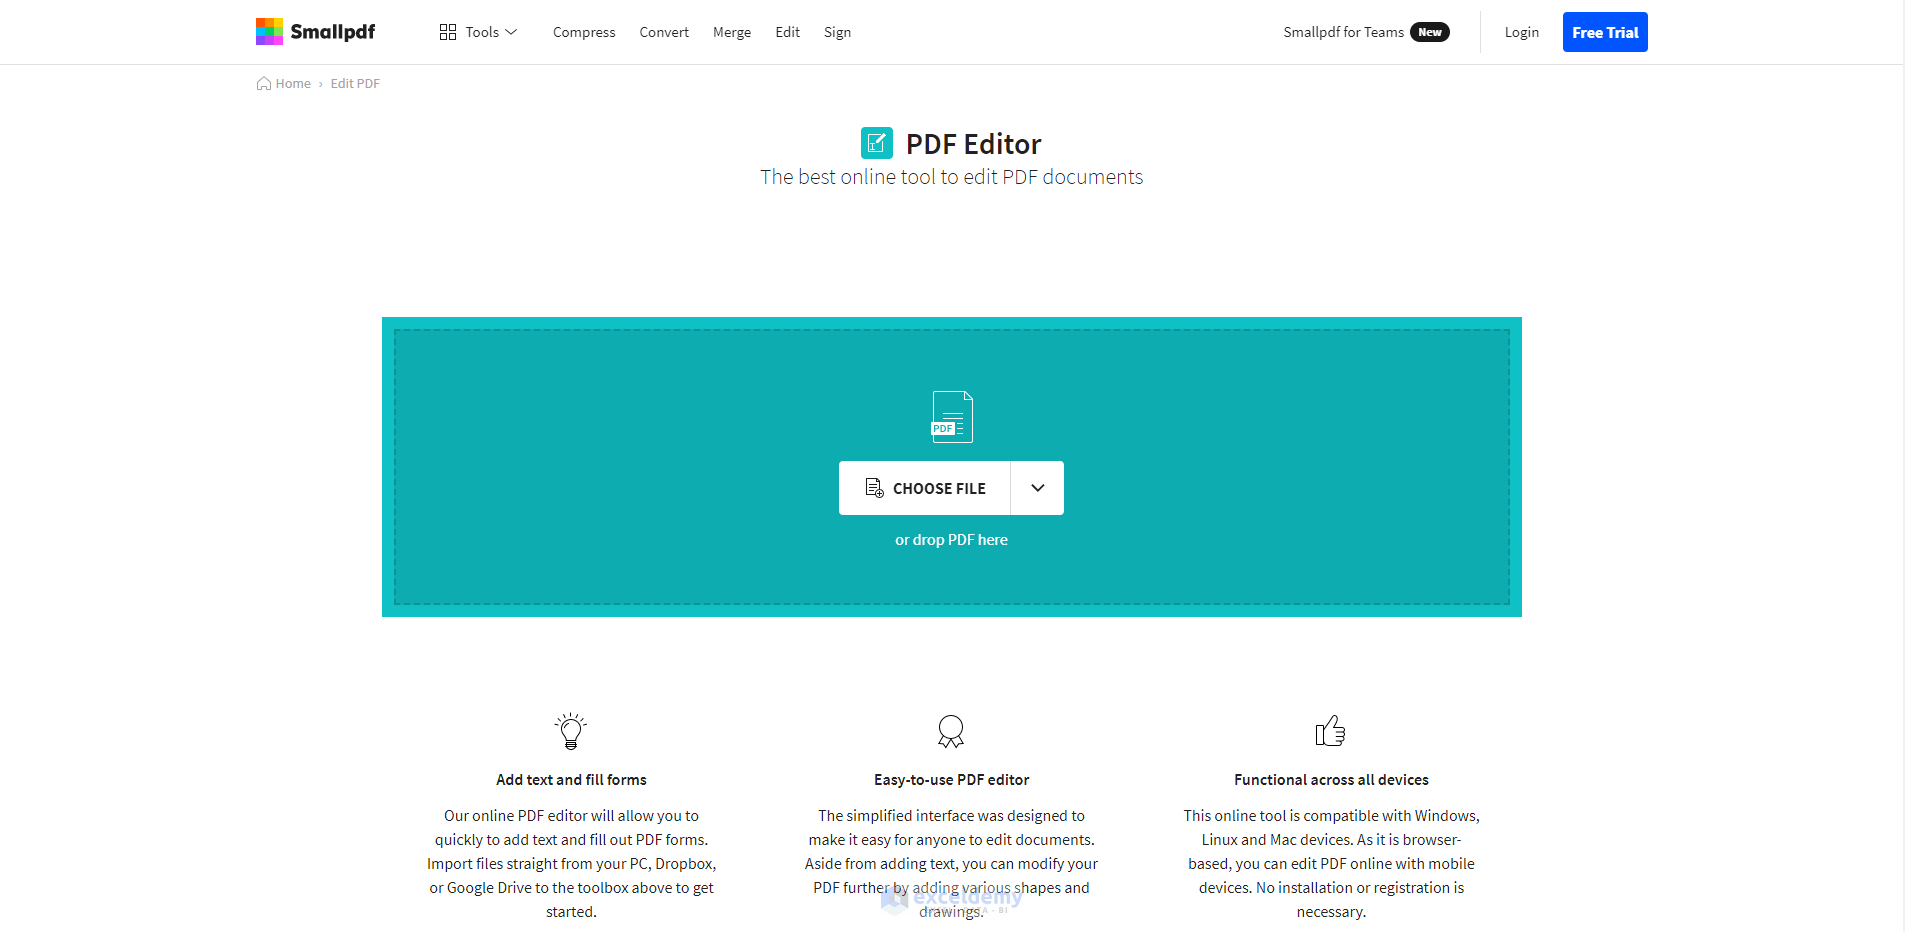 SmallPDF Review: First Look